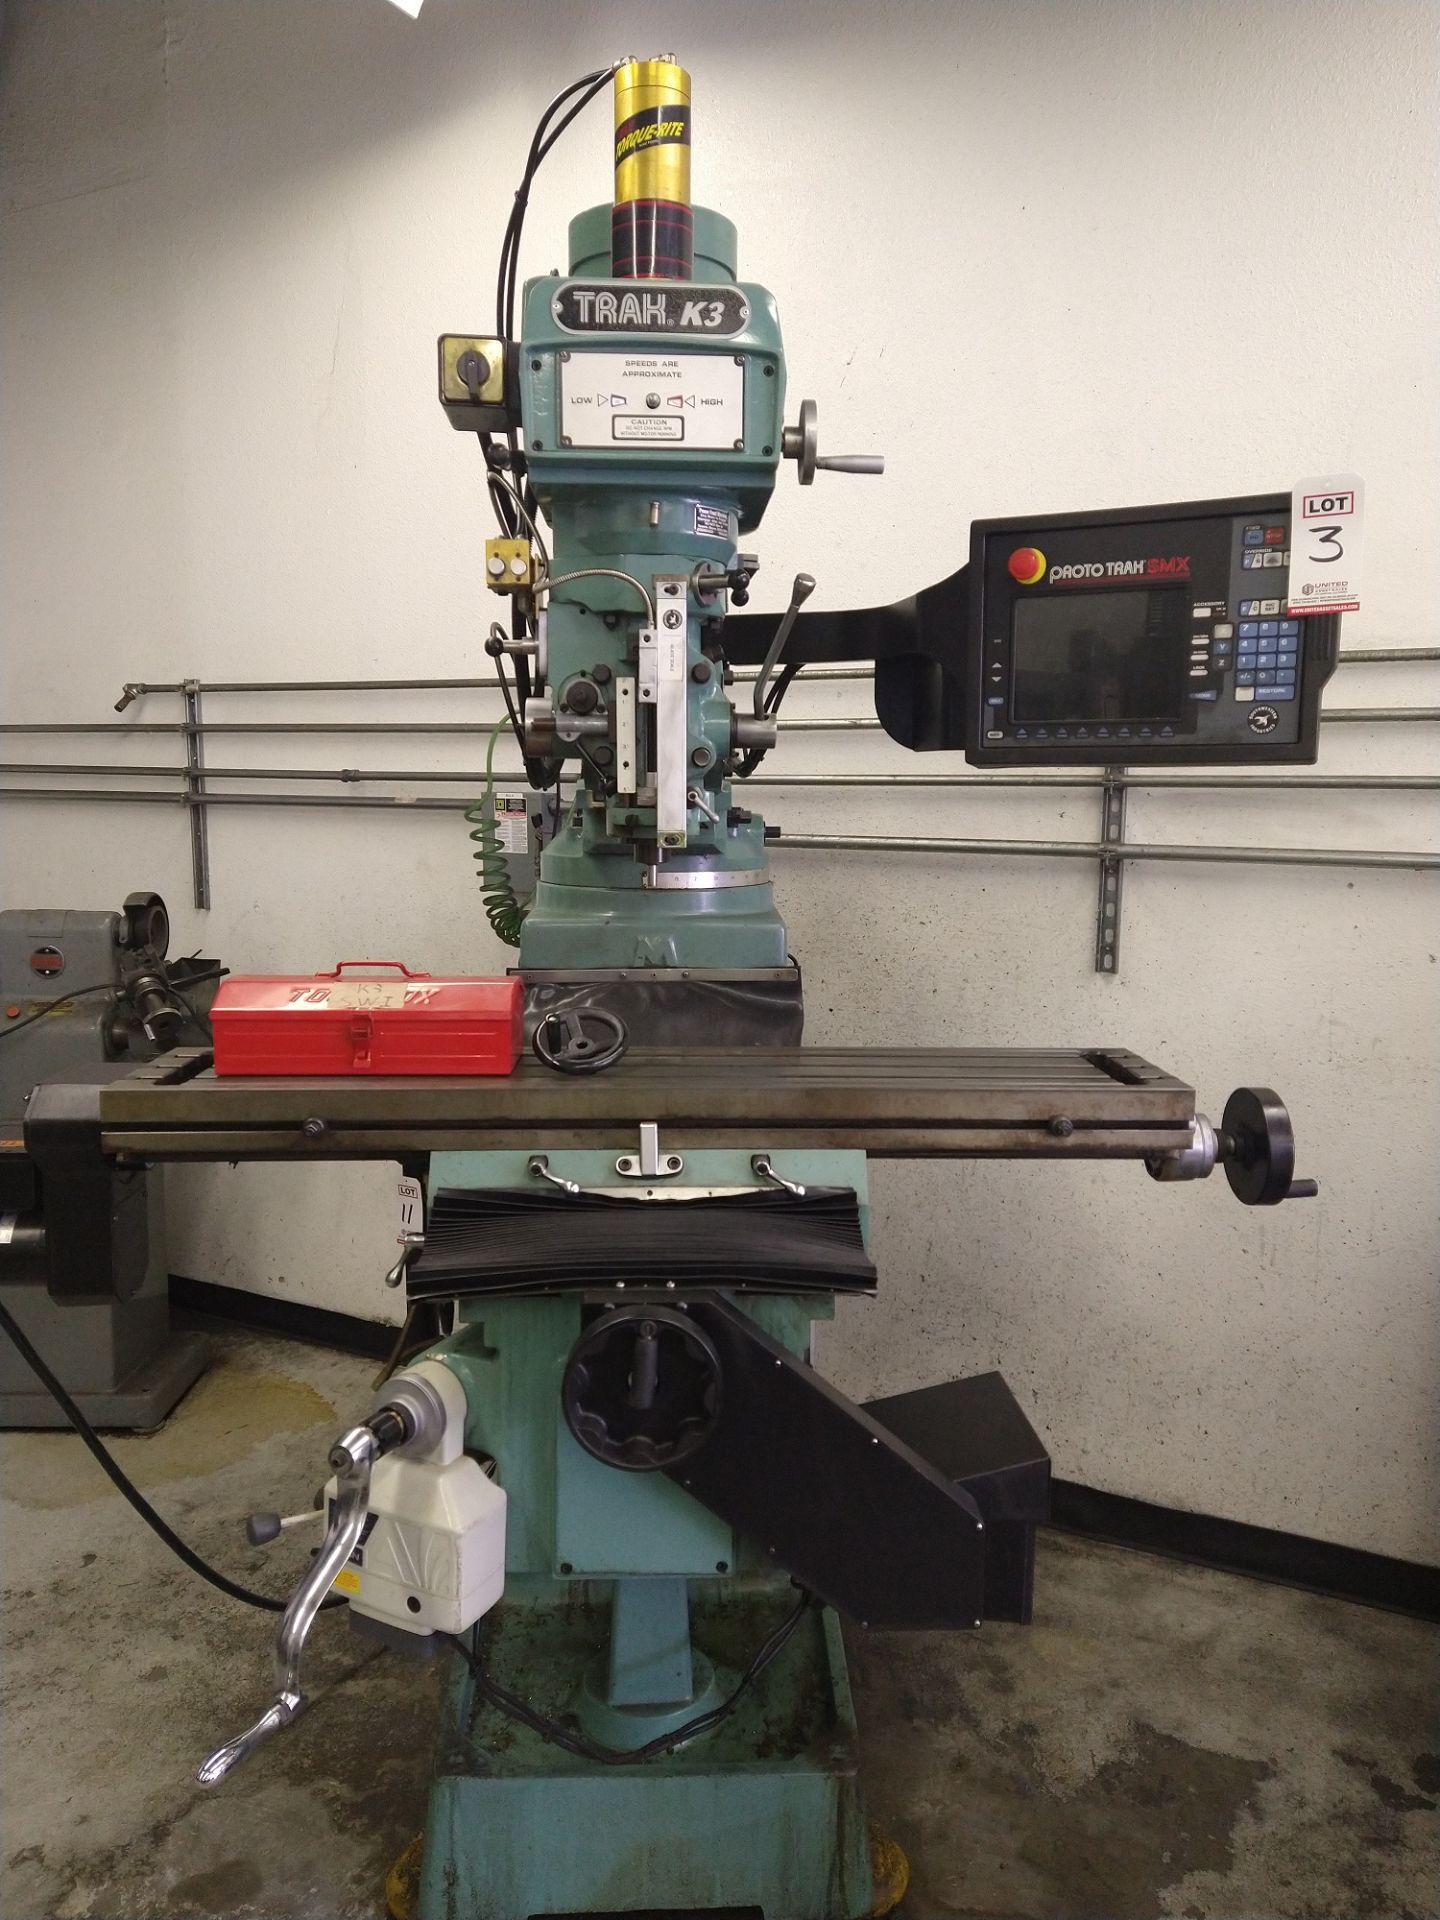 2013 TRAK K3SX CNC KNEE MILL, TRAVELS: 32" X 16" X 16", 50" X 10" TABLE, R8 SPINDLE TAPER, 4200 RPM, - Image 2 of 6